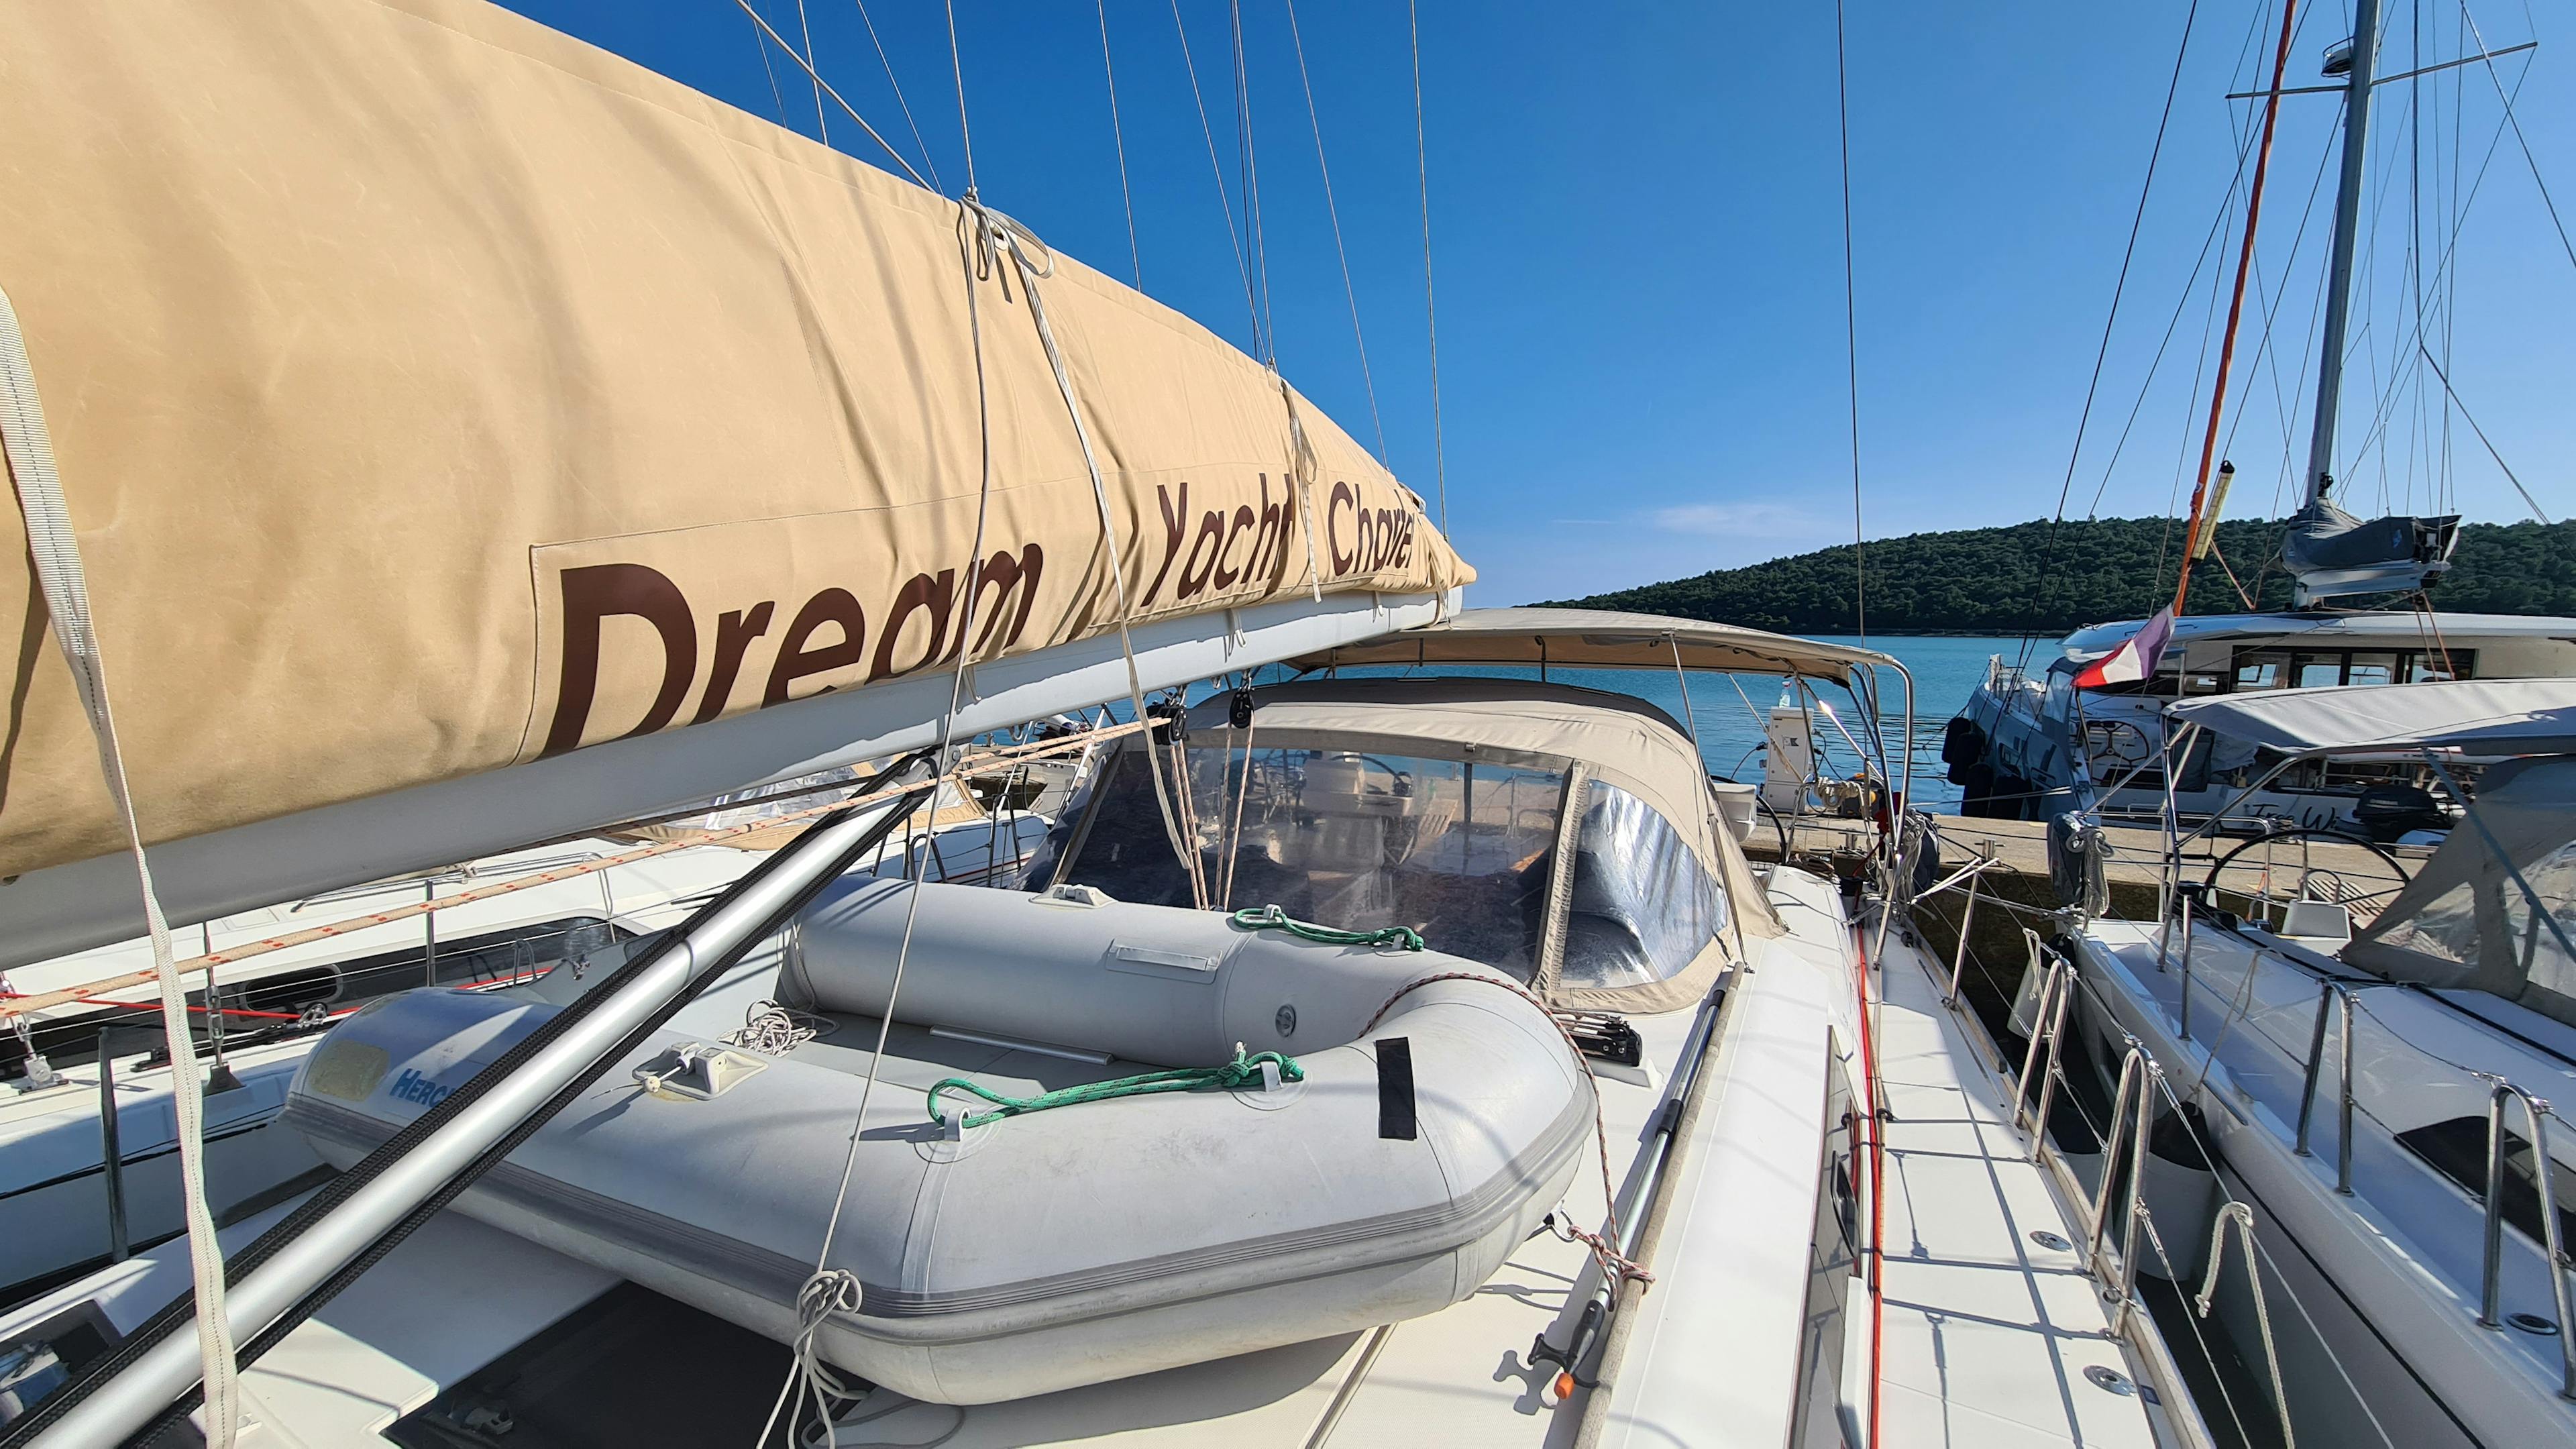 Book Dufour 520 GL Sailing yacht for bareboat charter in Pula, ACI Marina Pomer, Istra, Croatia with TripYacht!, picture 6